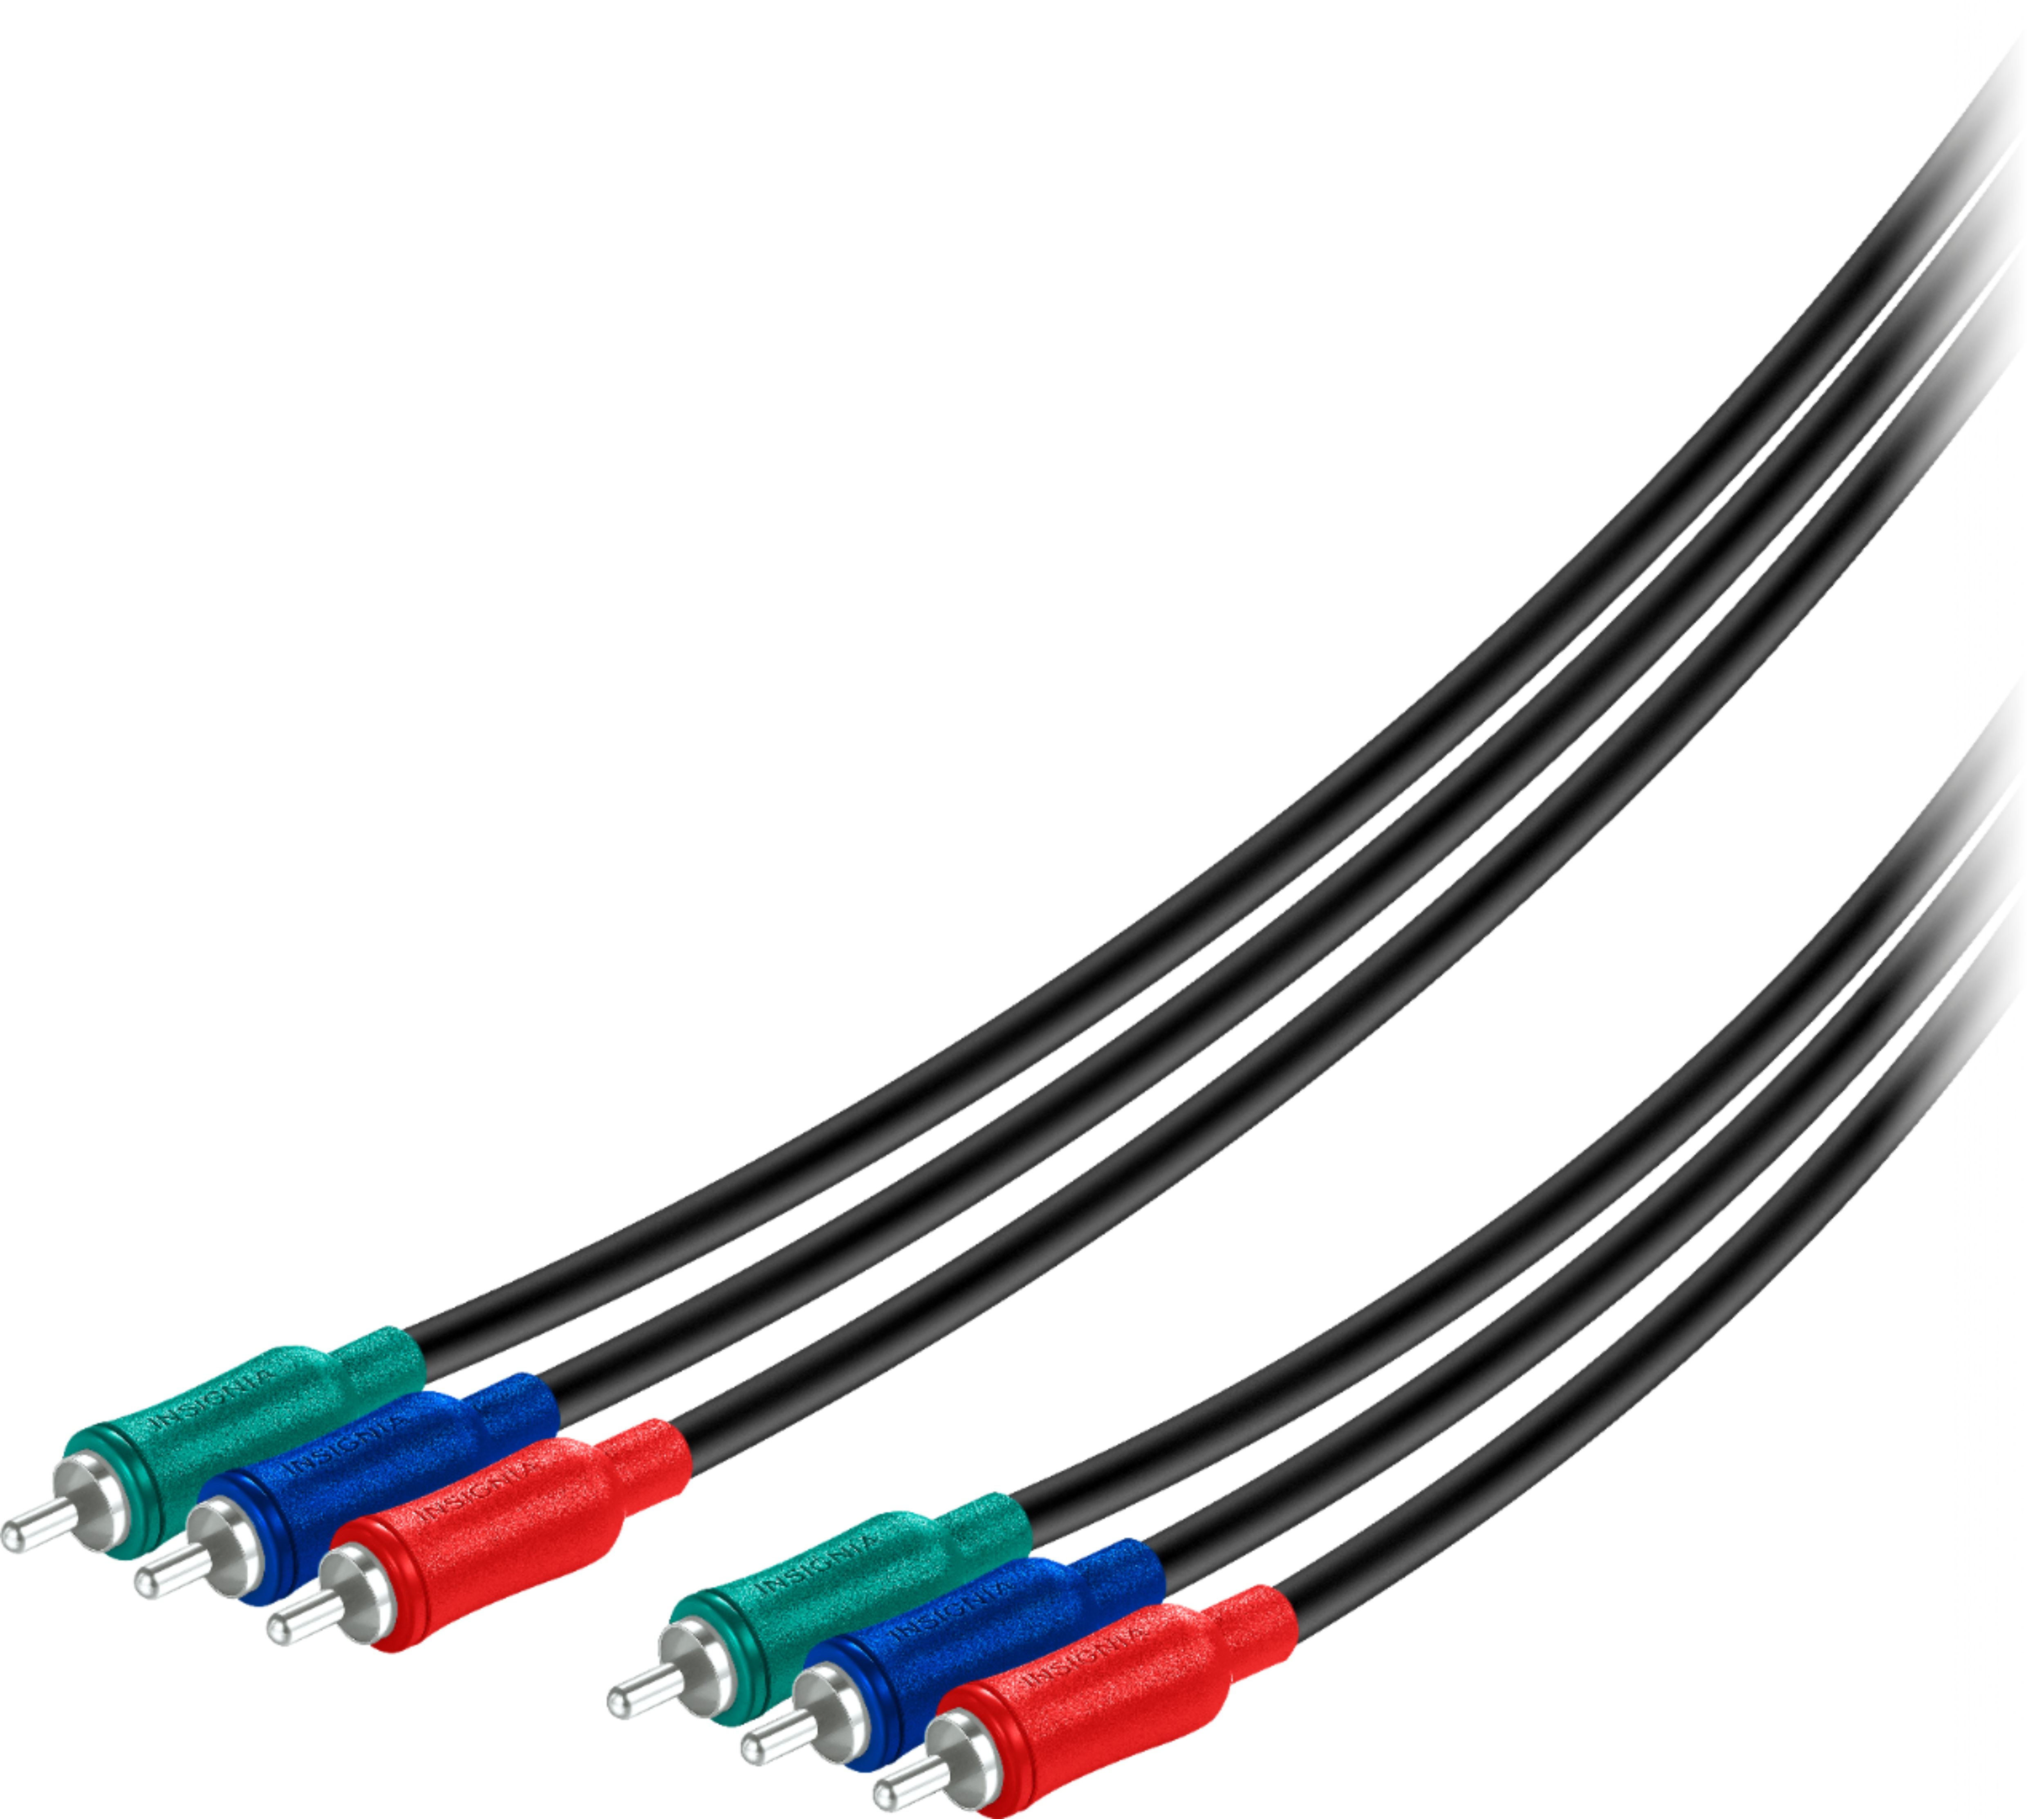 Angle View: AudioQuest - Water 6.6' RCA Interconnect Cable - Black/Blue